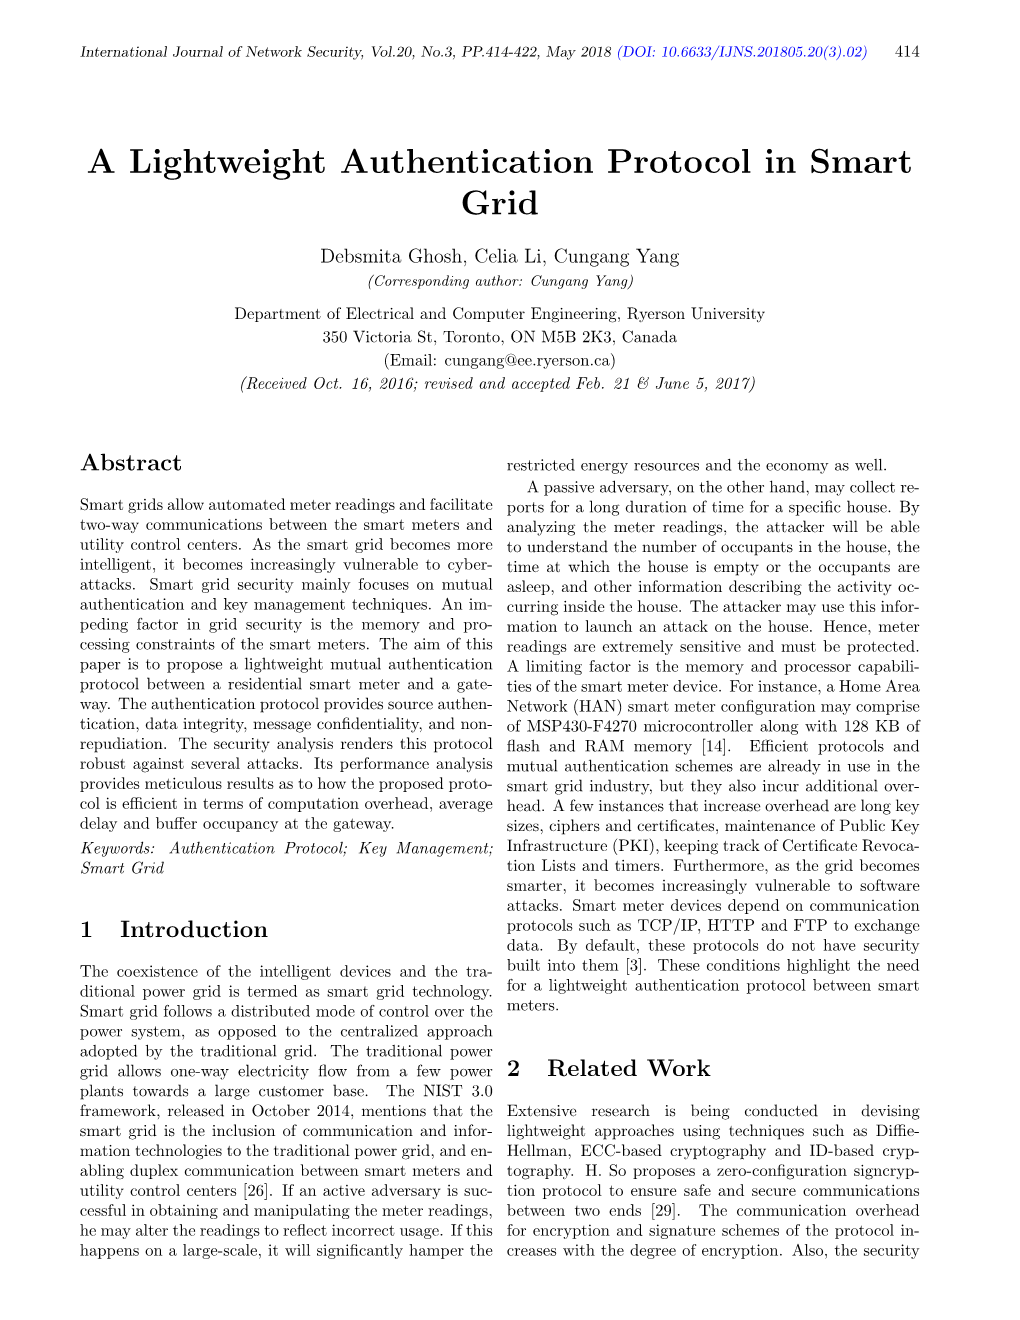 A Lightweight Authentication Protocol in Smart Grid